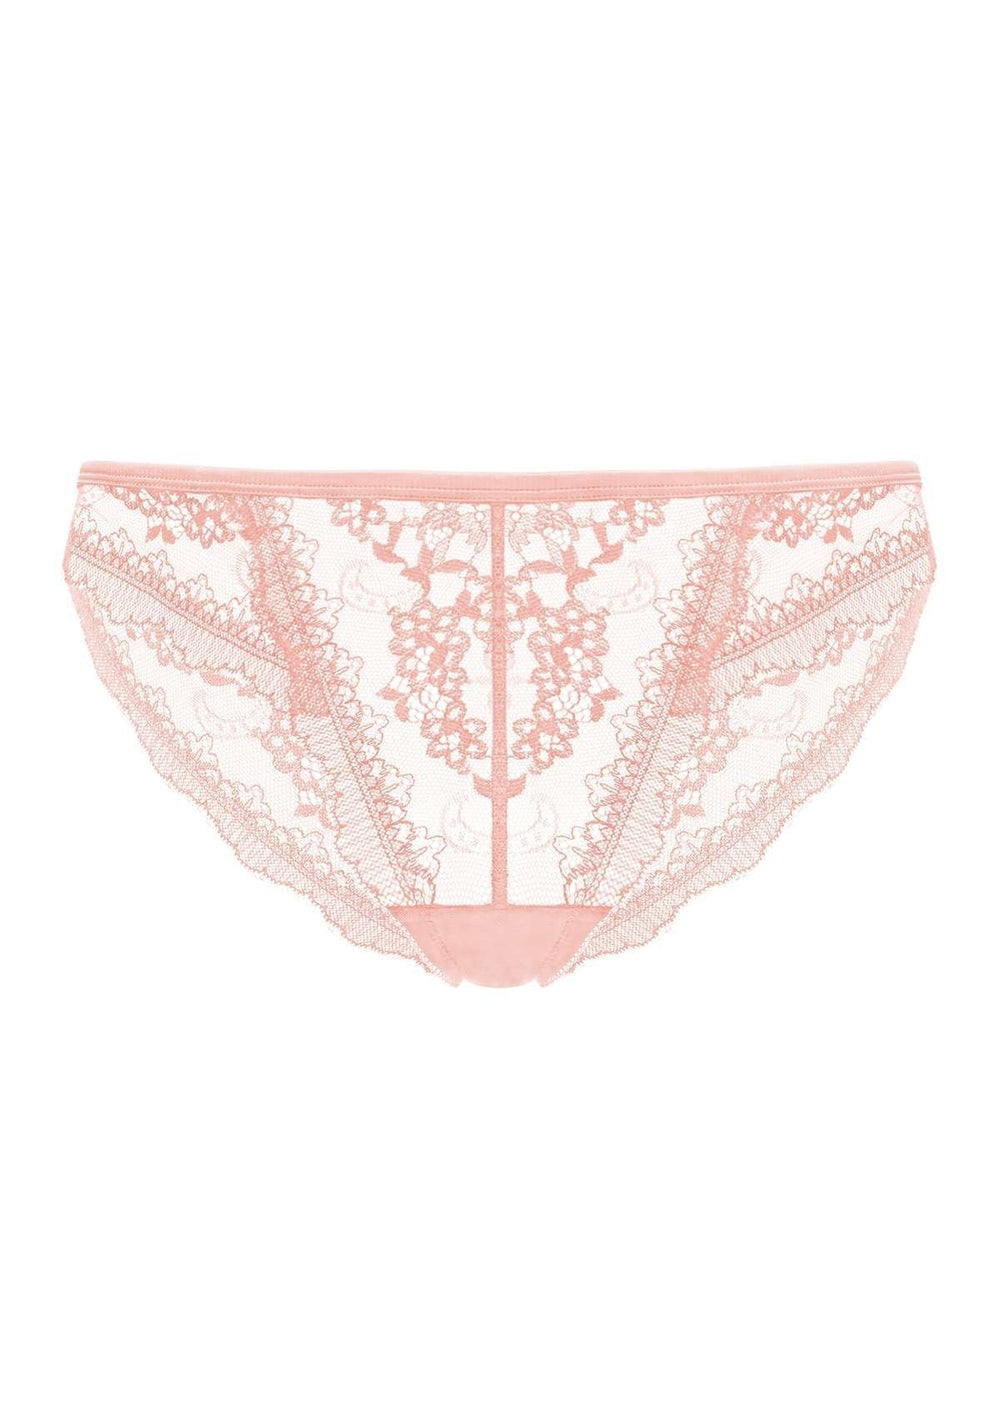 HSIA Floral Bridal Lace Back Cheeky Delicate Underwear